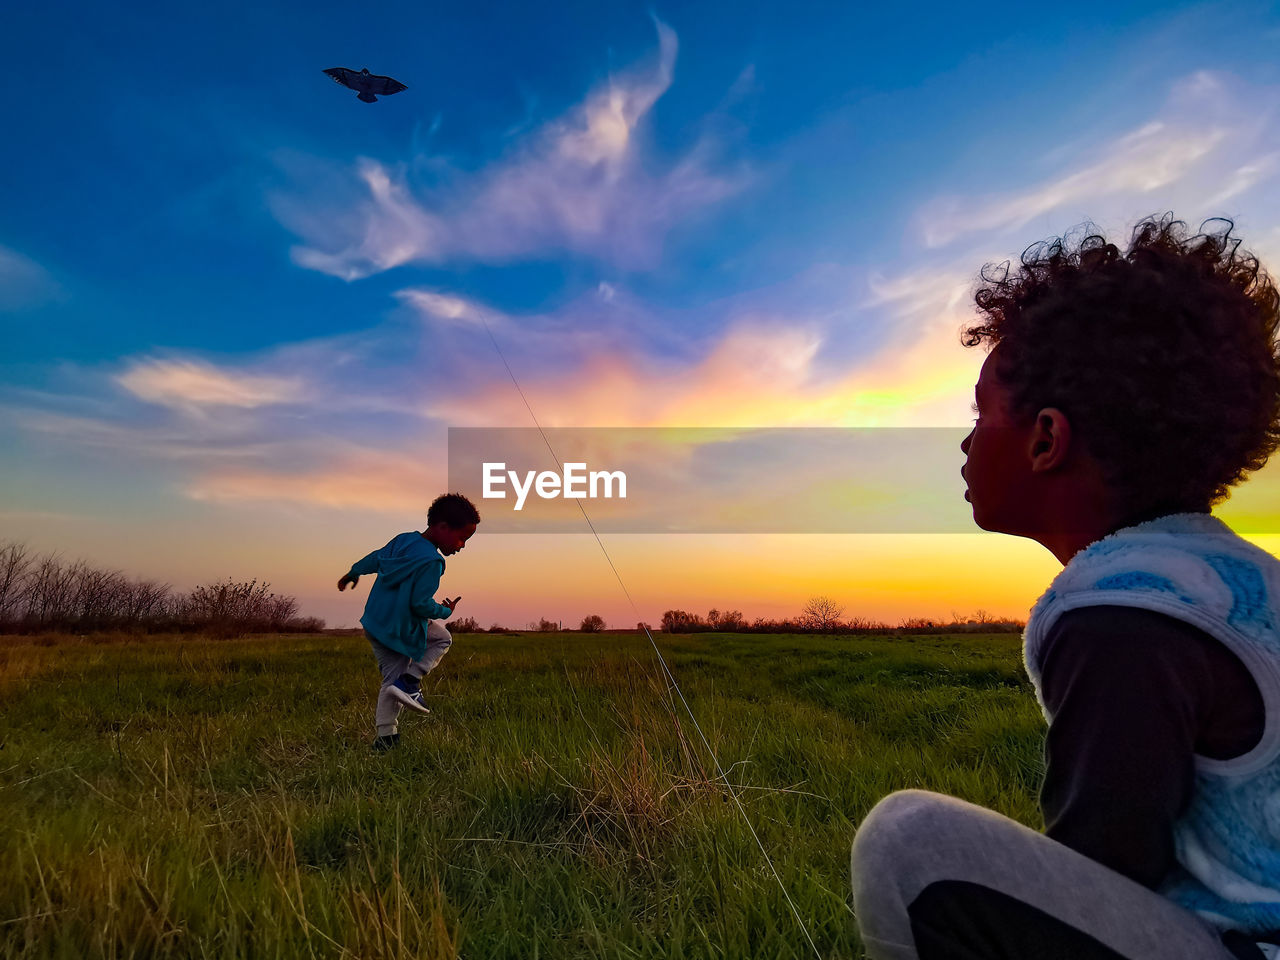 BOY ON FIELD AGAINST SKY DURING SUNSET